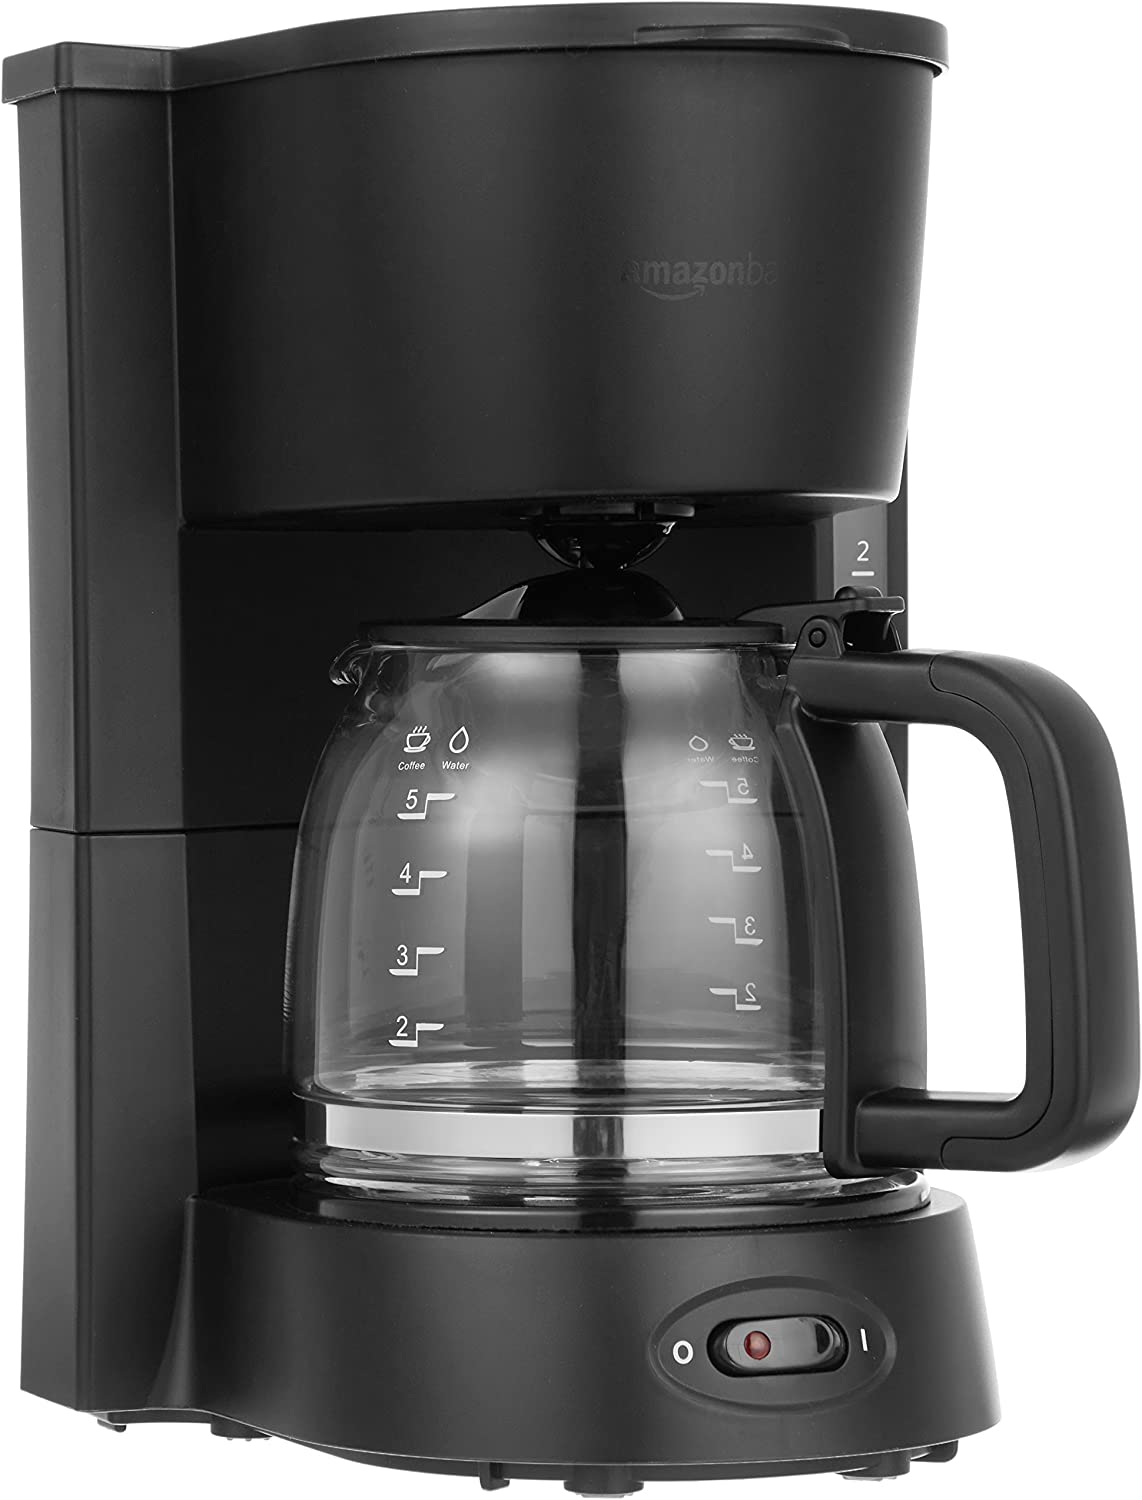 AmazonBasics 5-Cup Coffeemaker with Glass Carafe